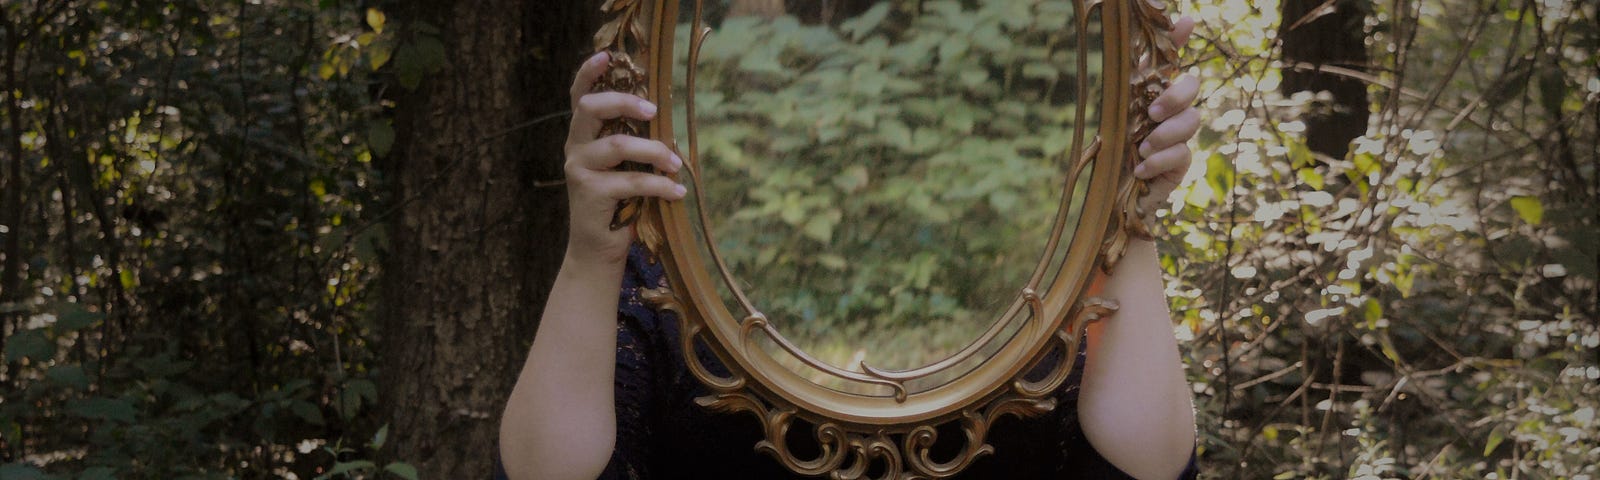 woman, in woods, holding mirror, reflection of self